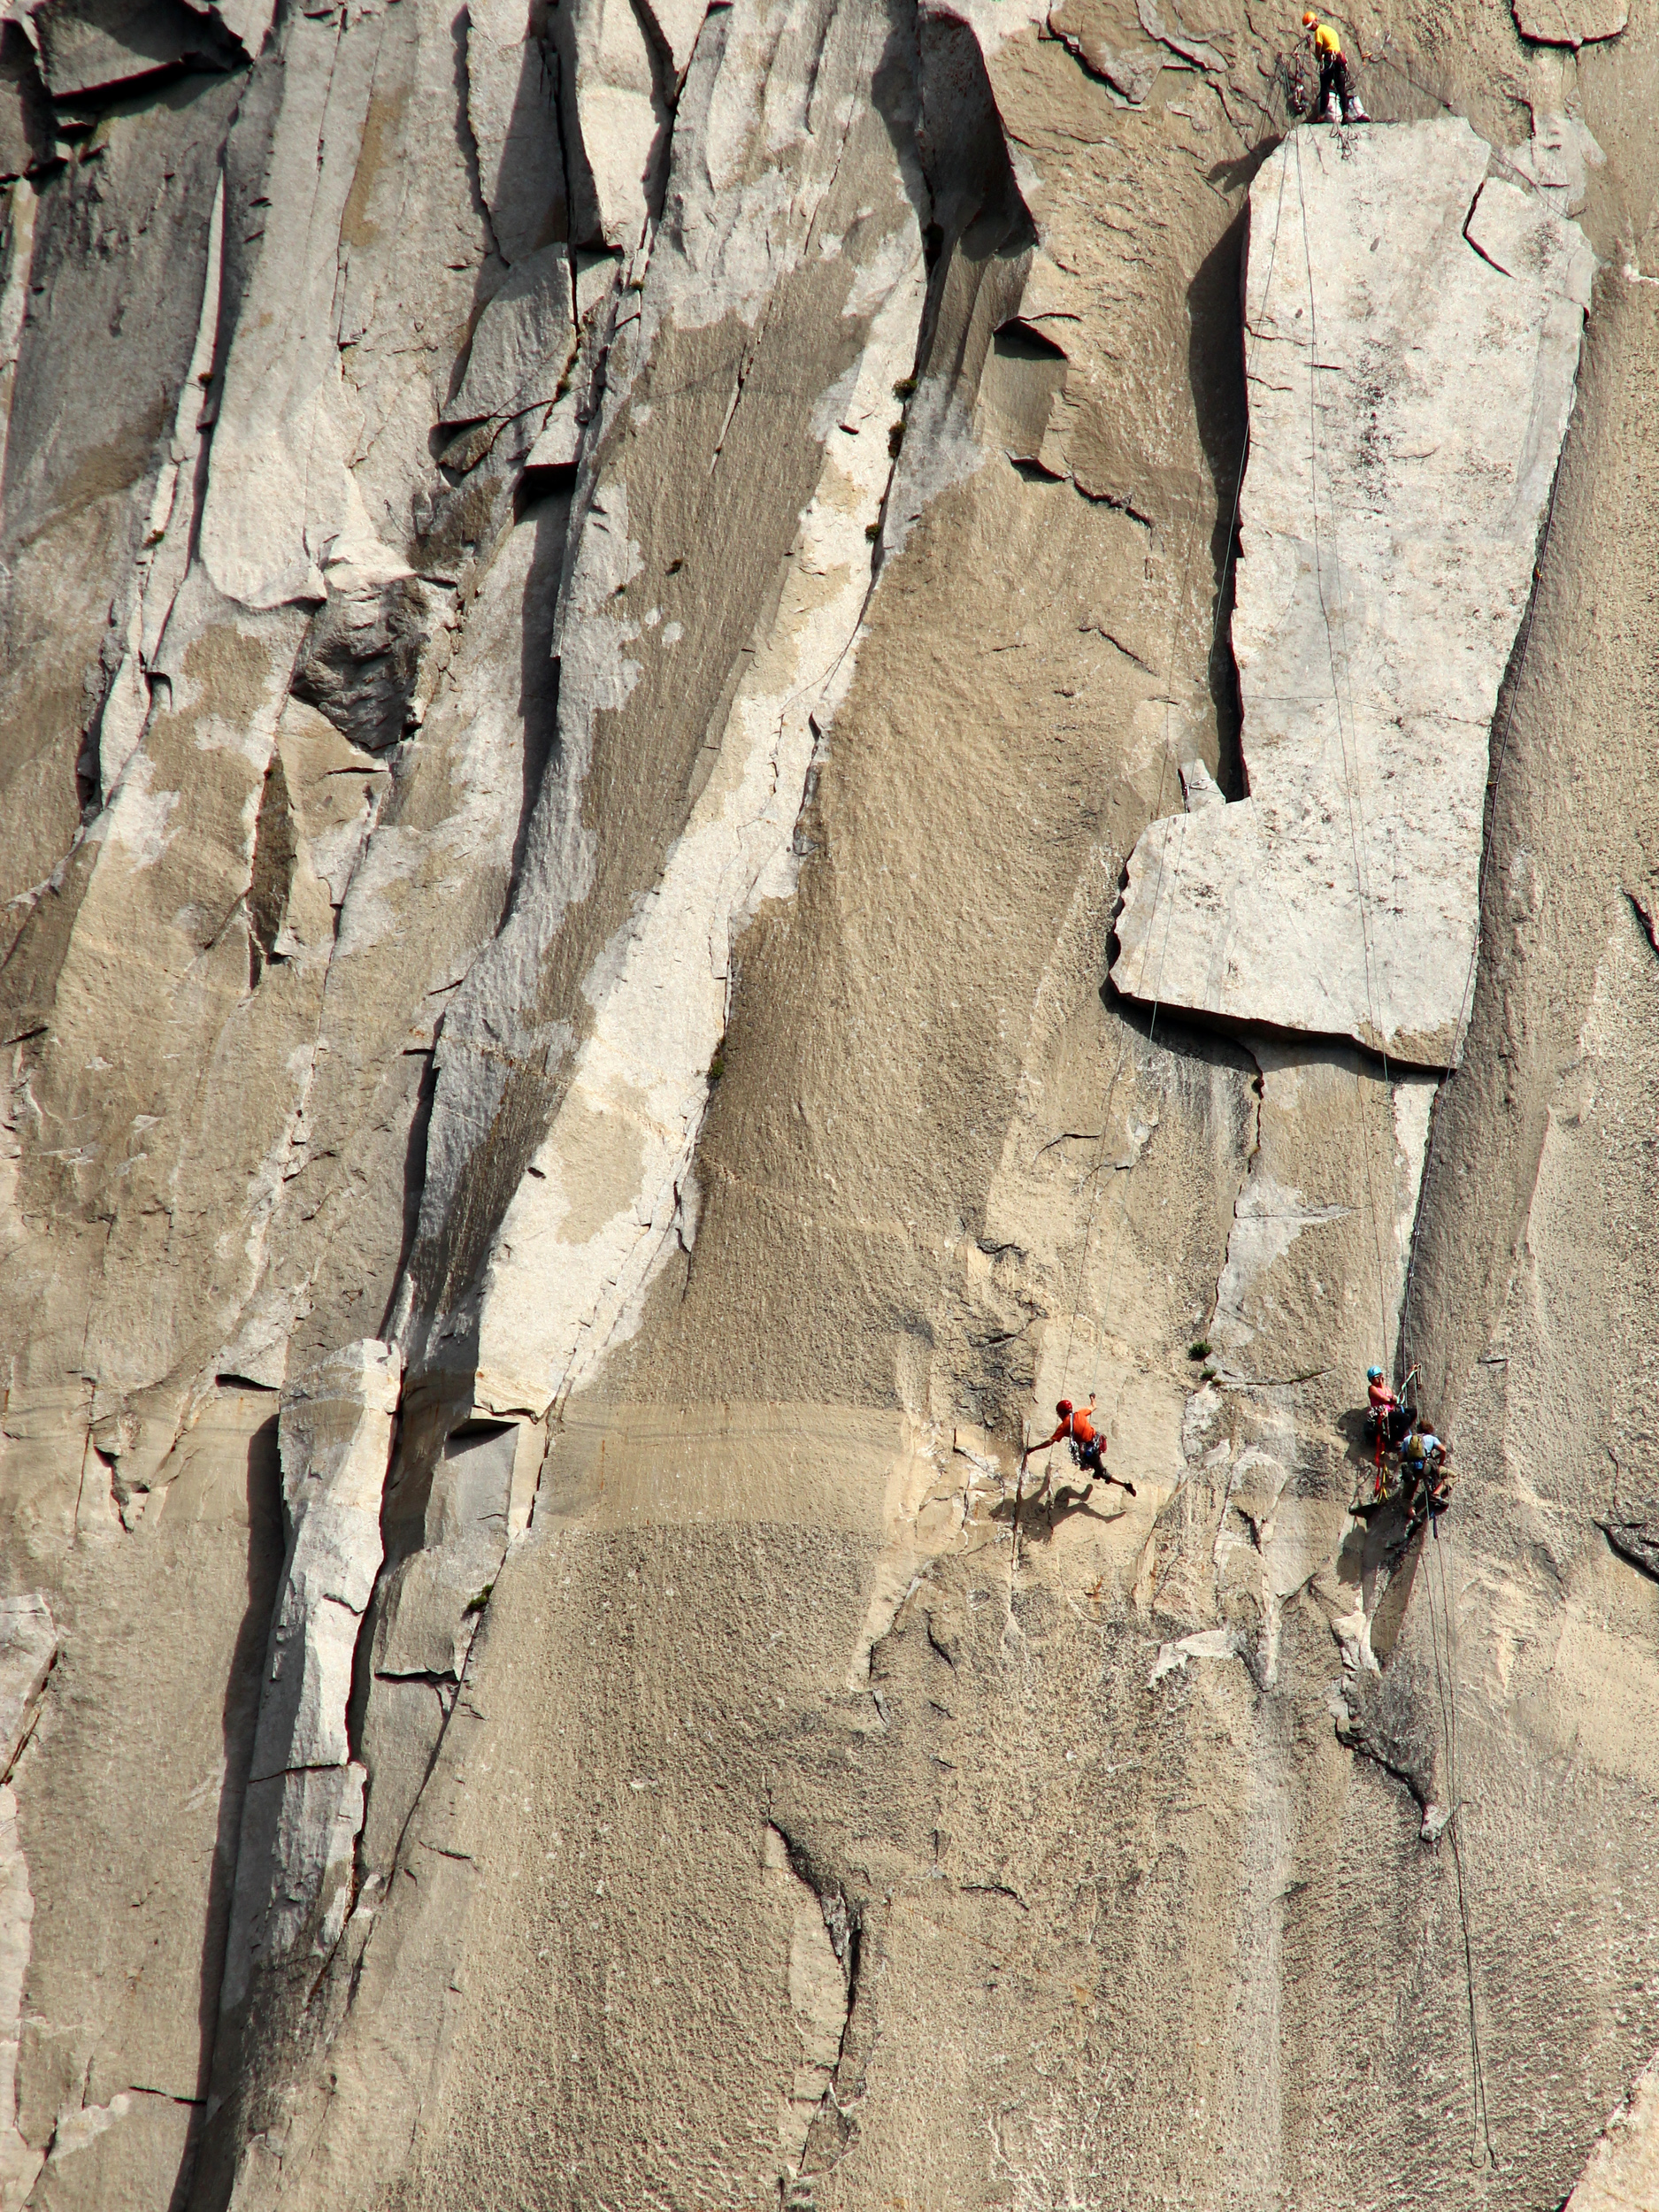 Ben Ditto (orange shirt) runs back and forth to complete the king swing on El Capitan's famous nose route.